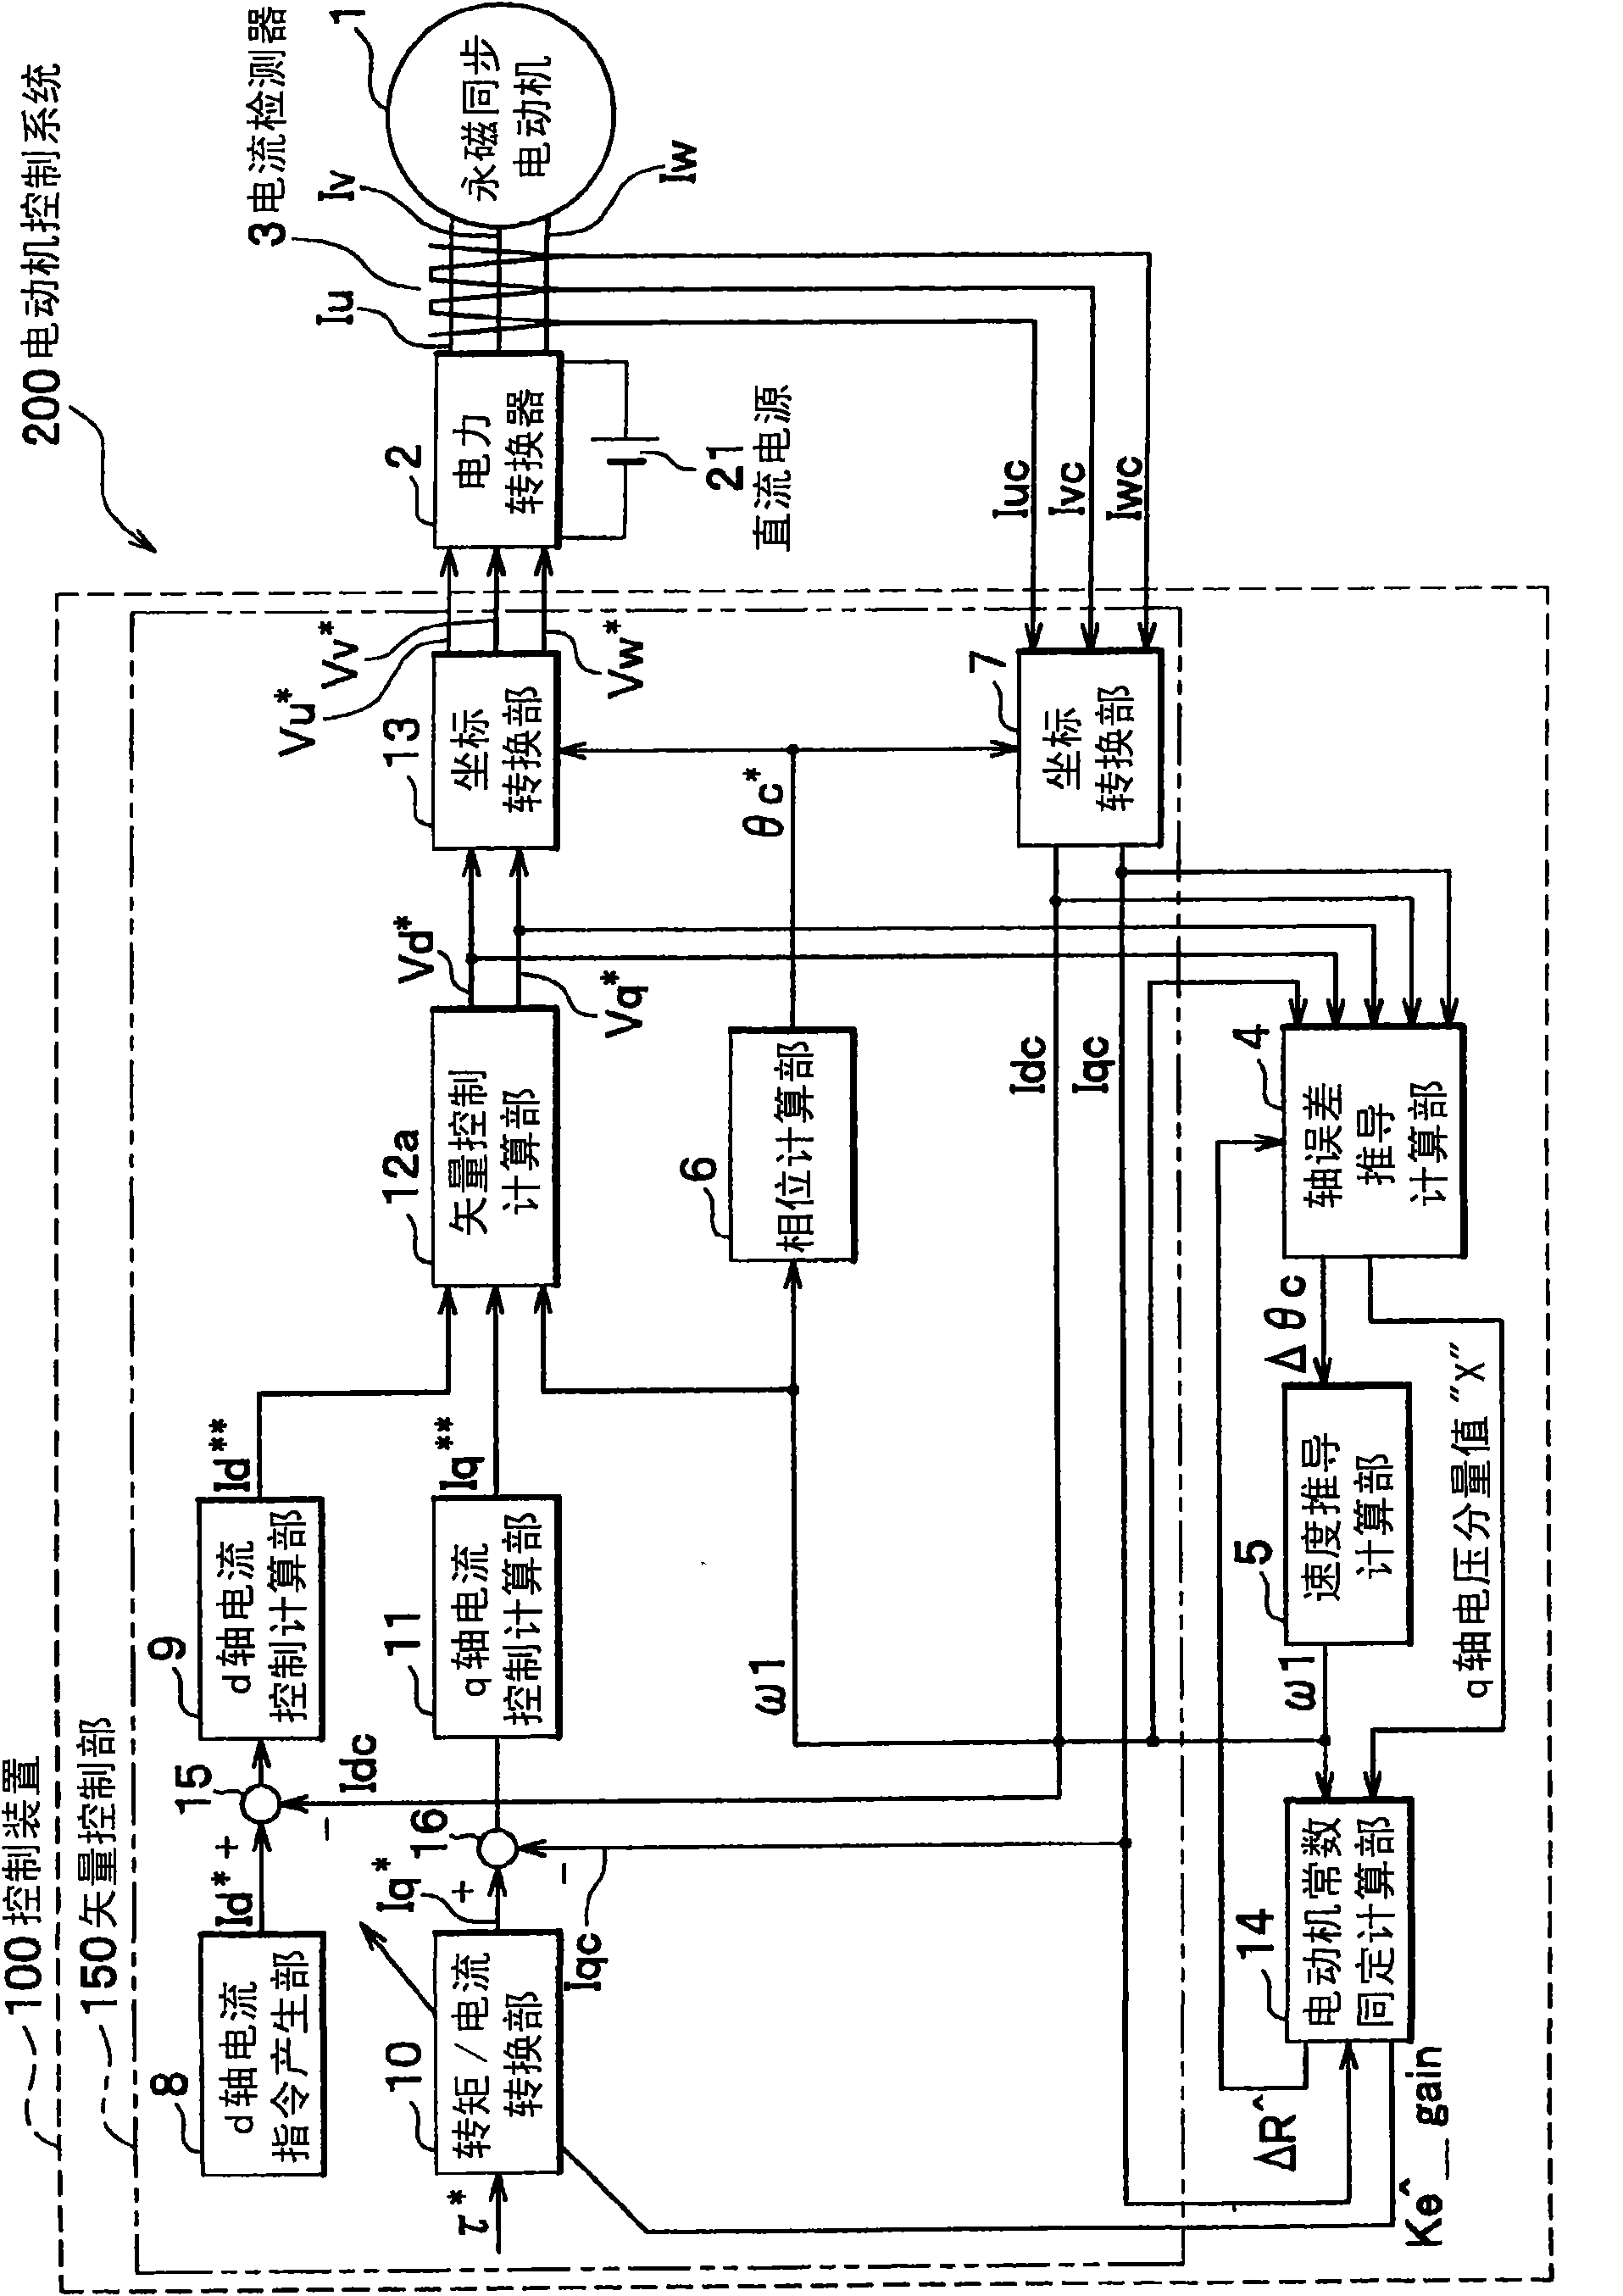 Controller for permanent magnet synchronous motor and motor control system